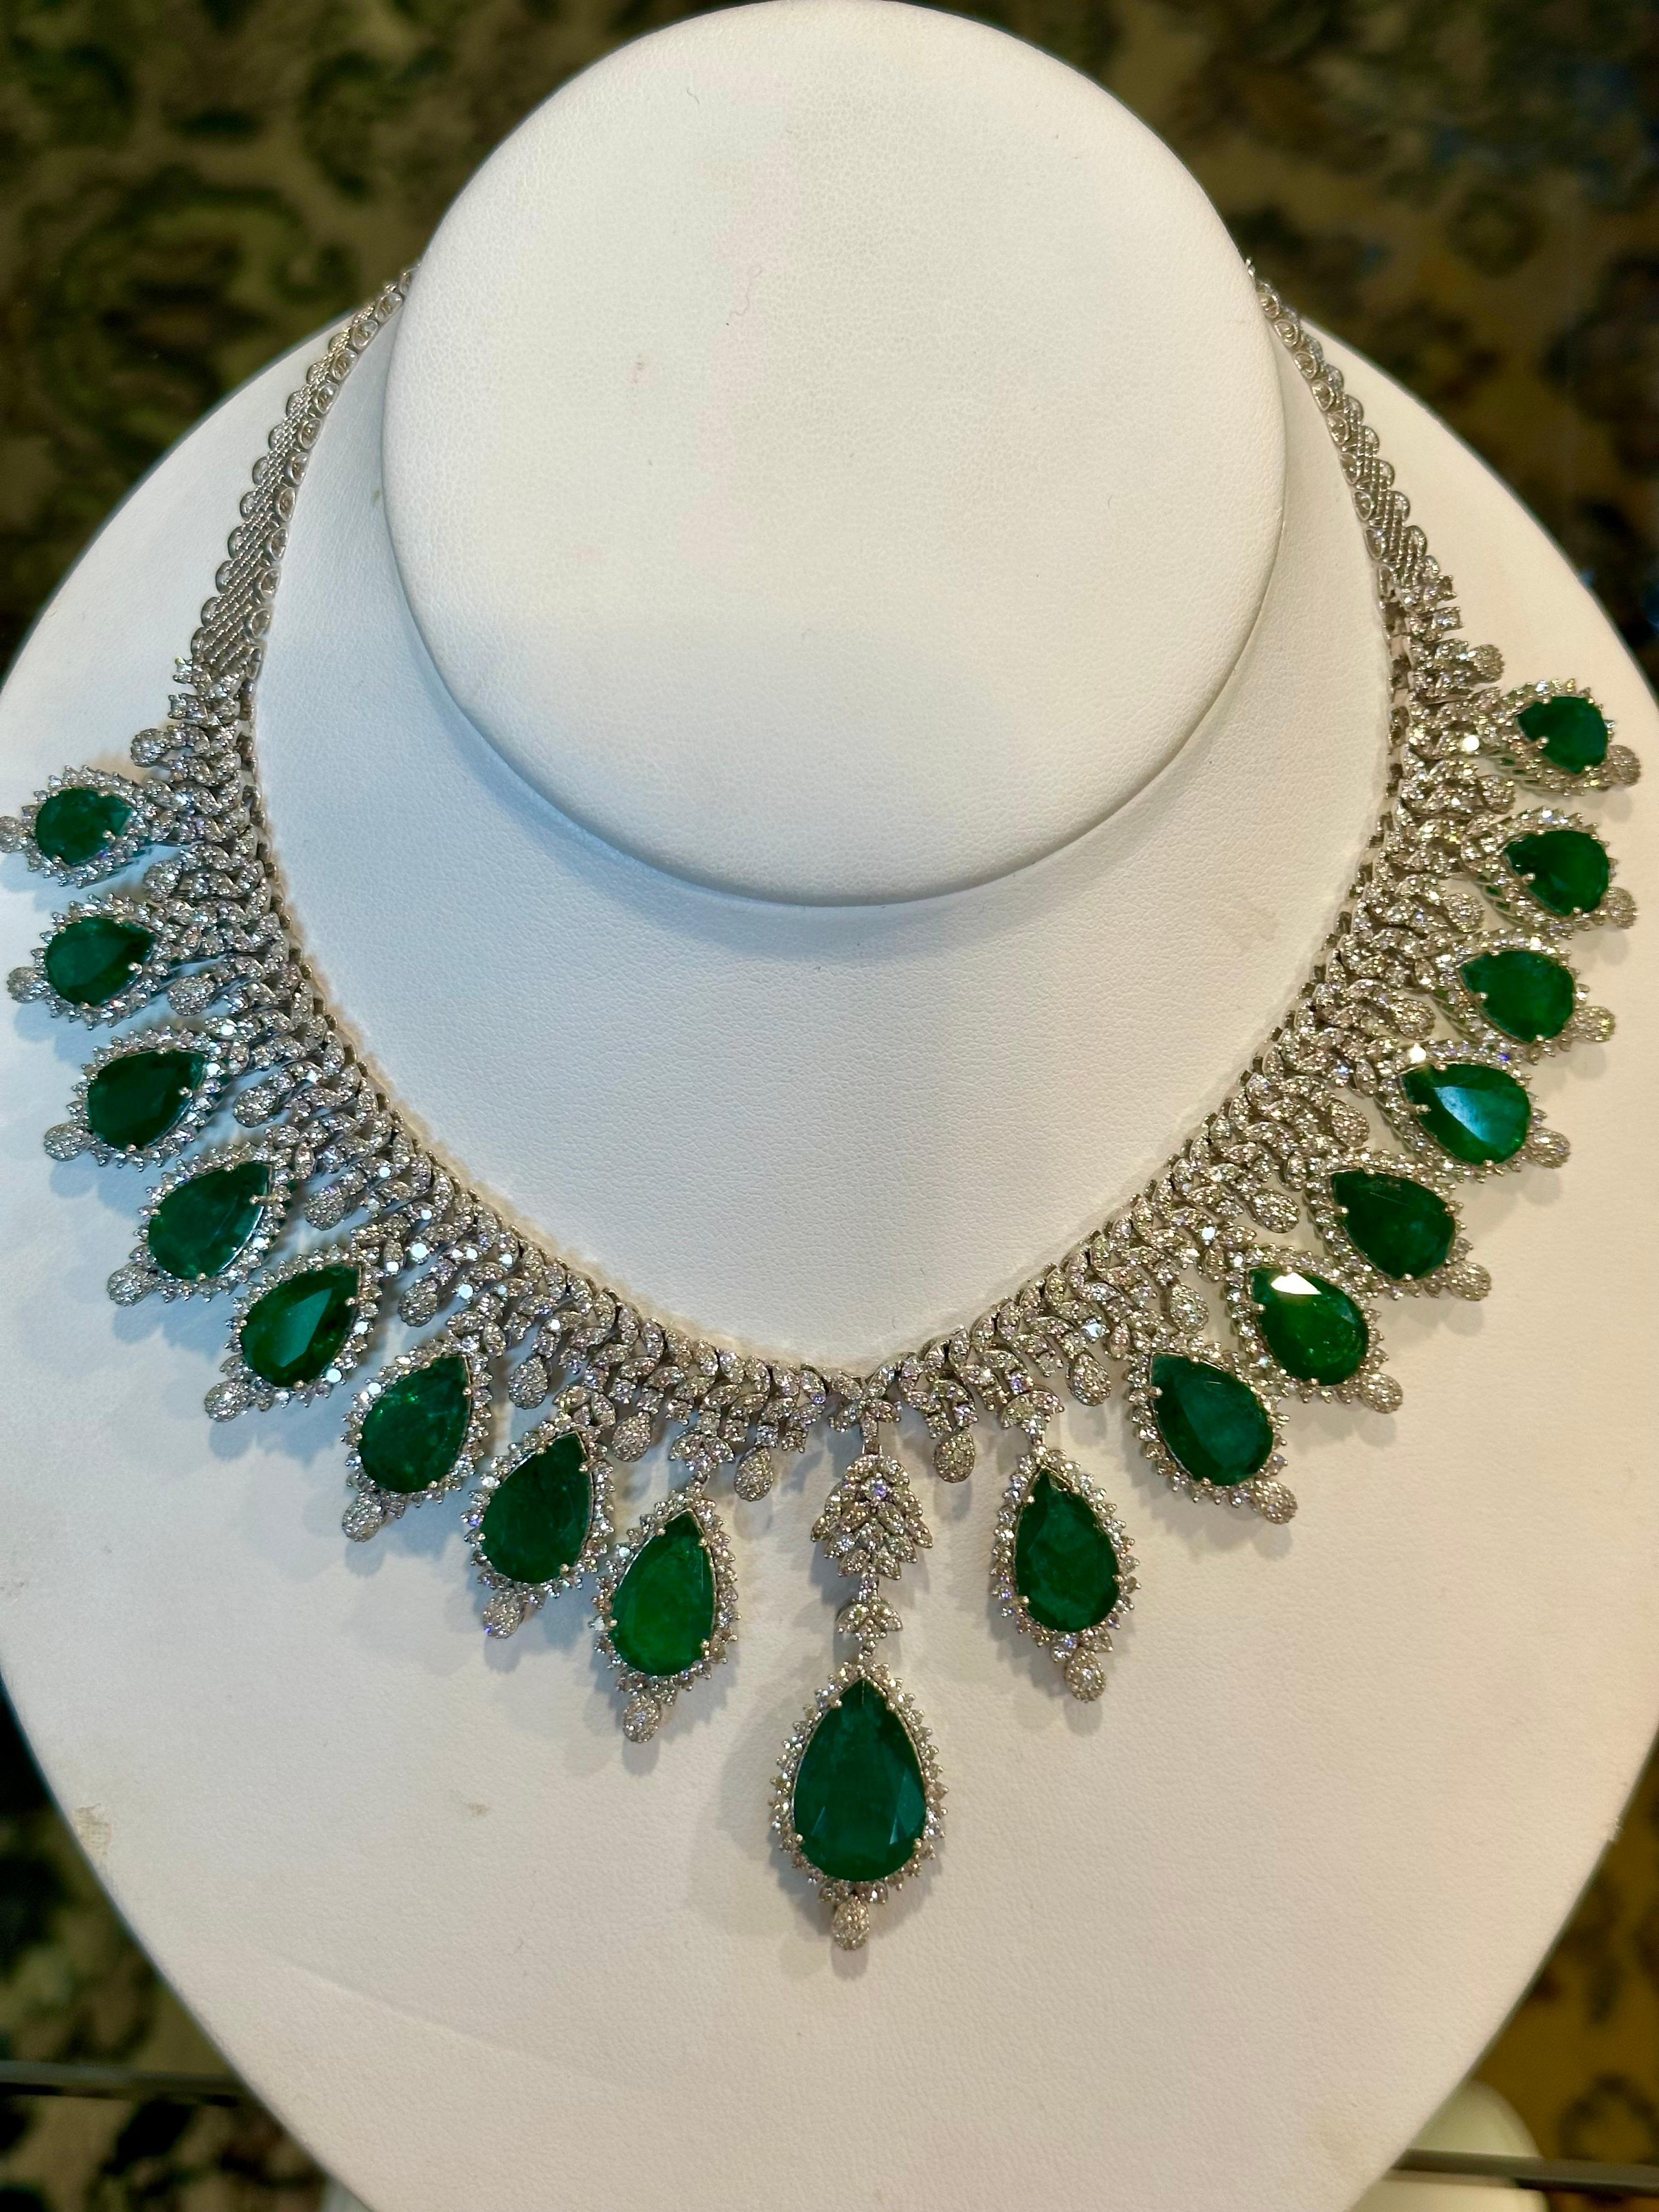 73ct Zambian Emerald and 22ct Diamond Necklace and Earring Bridal Suite In Excellent Condition For Sale In New York, NY